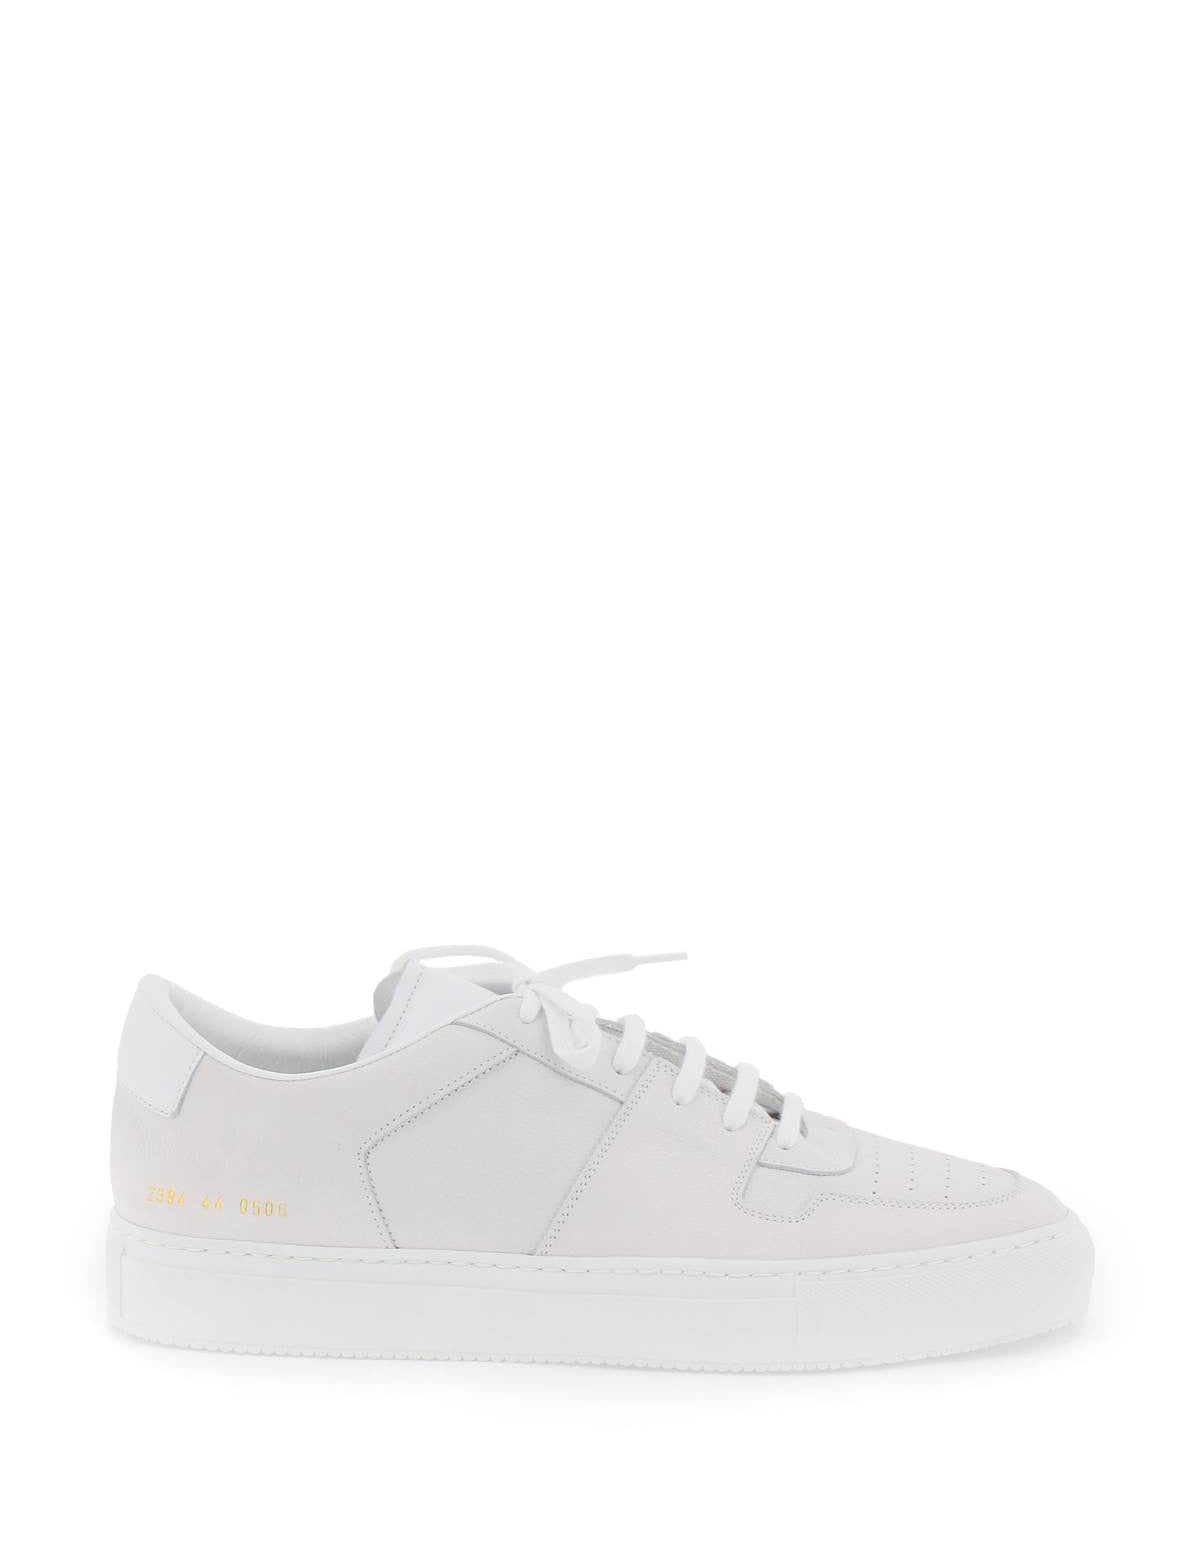 common-projects-decades-low-sneakers.jpg